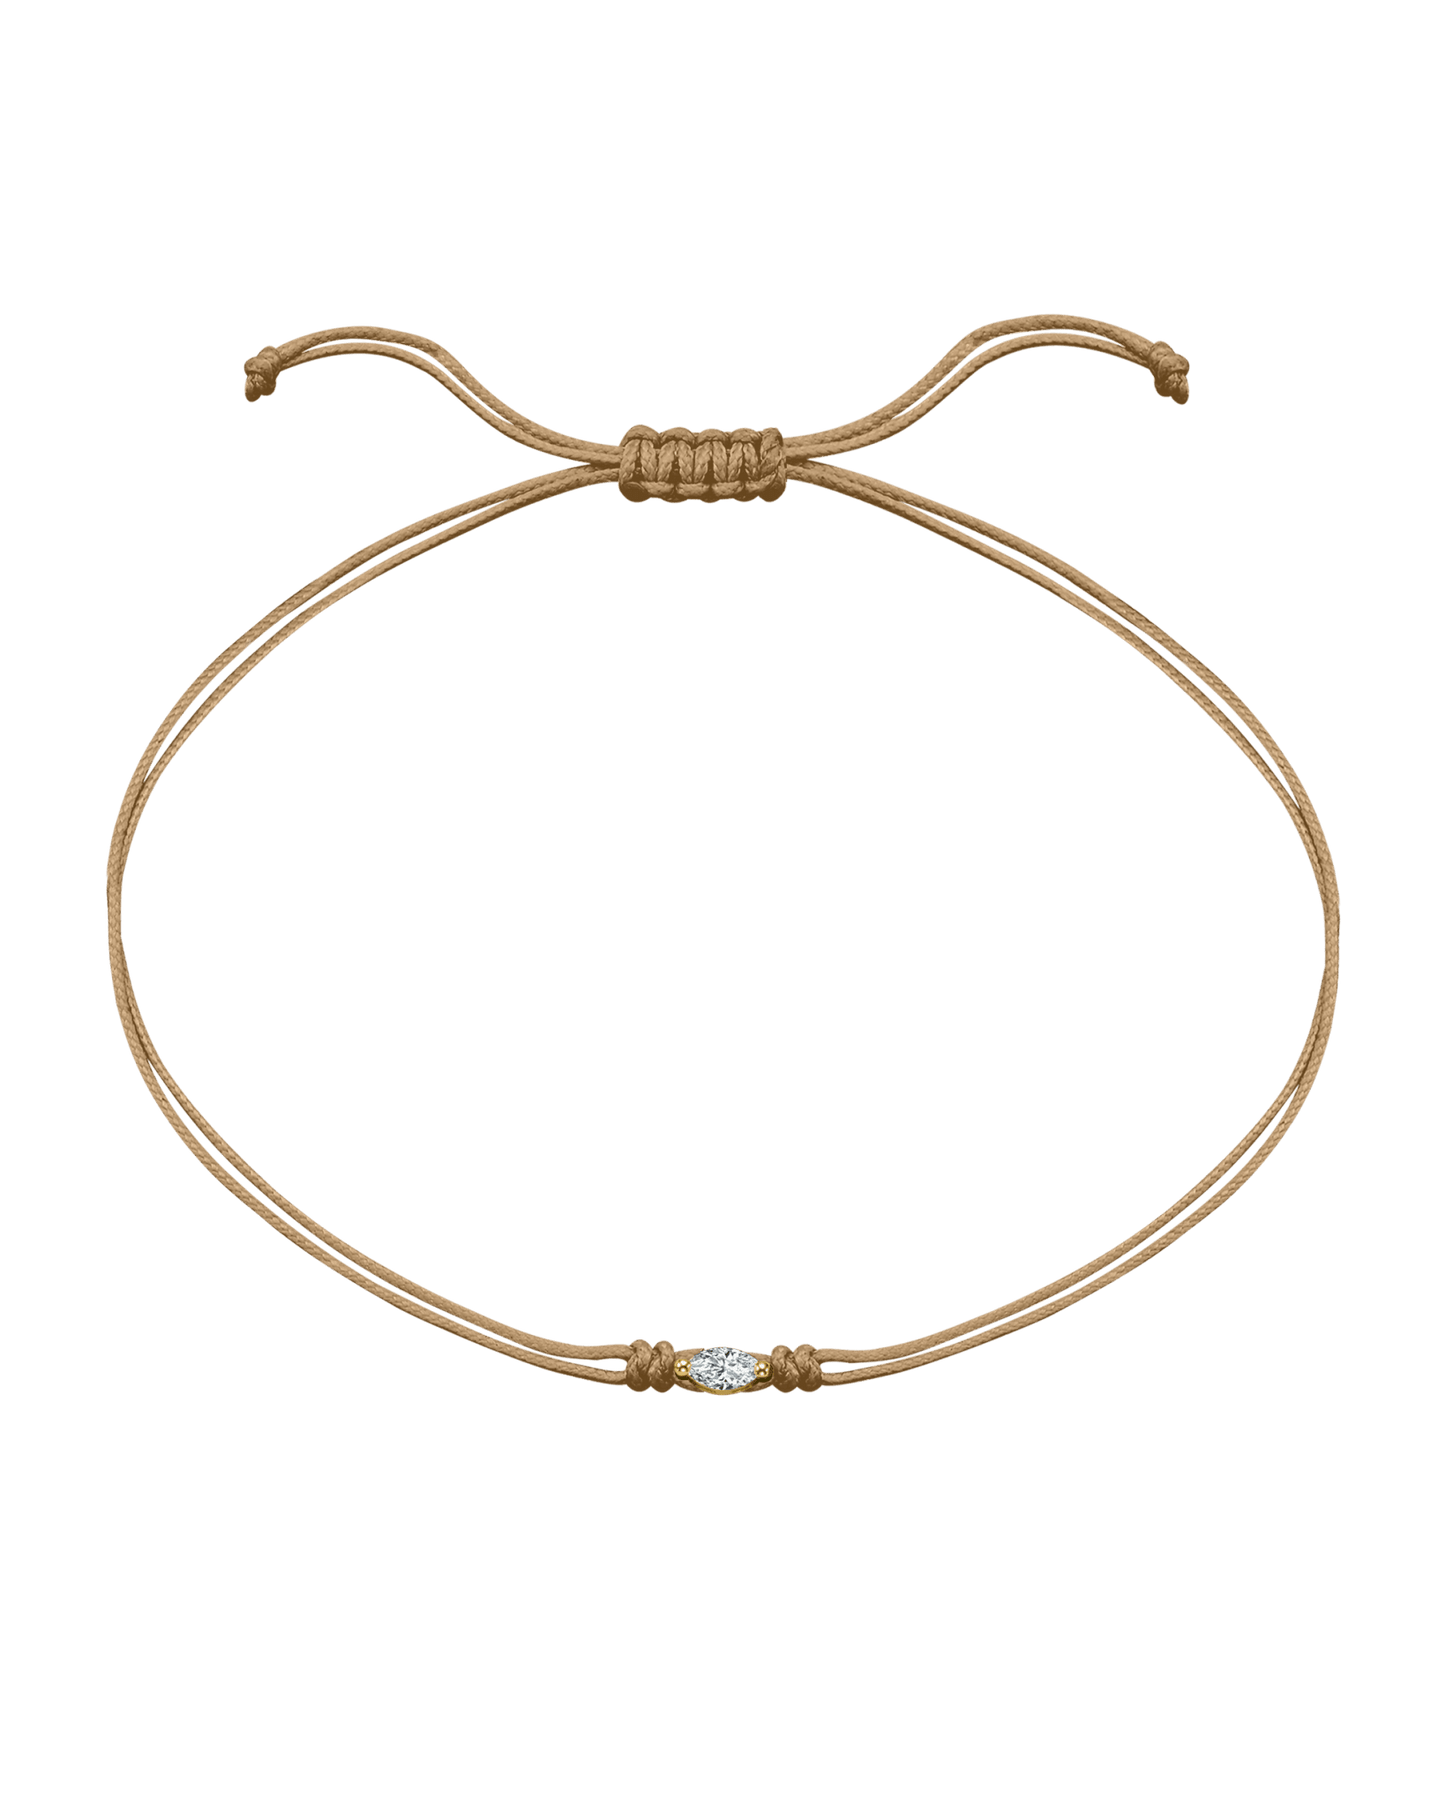 Marquise Diamond String Of Love - 14K Yellow Gold Bracelets 14K Solid Gold Camel 